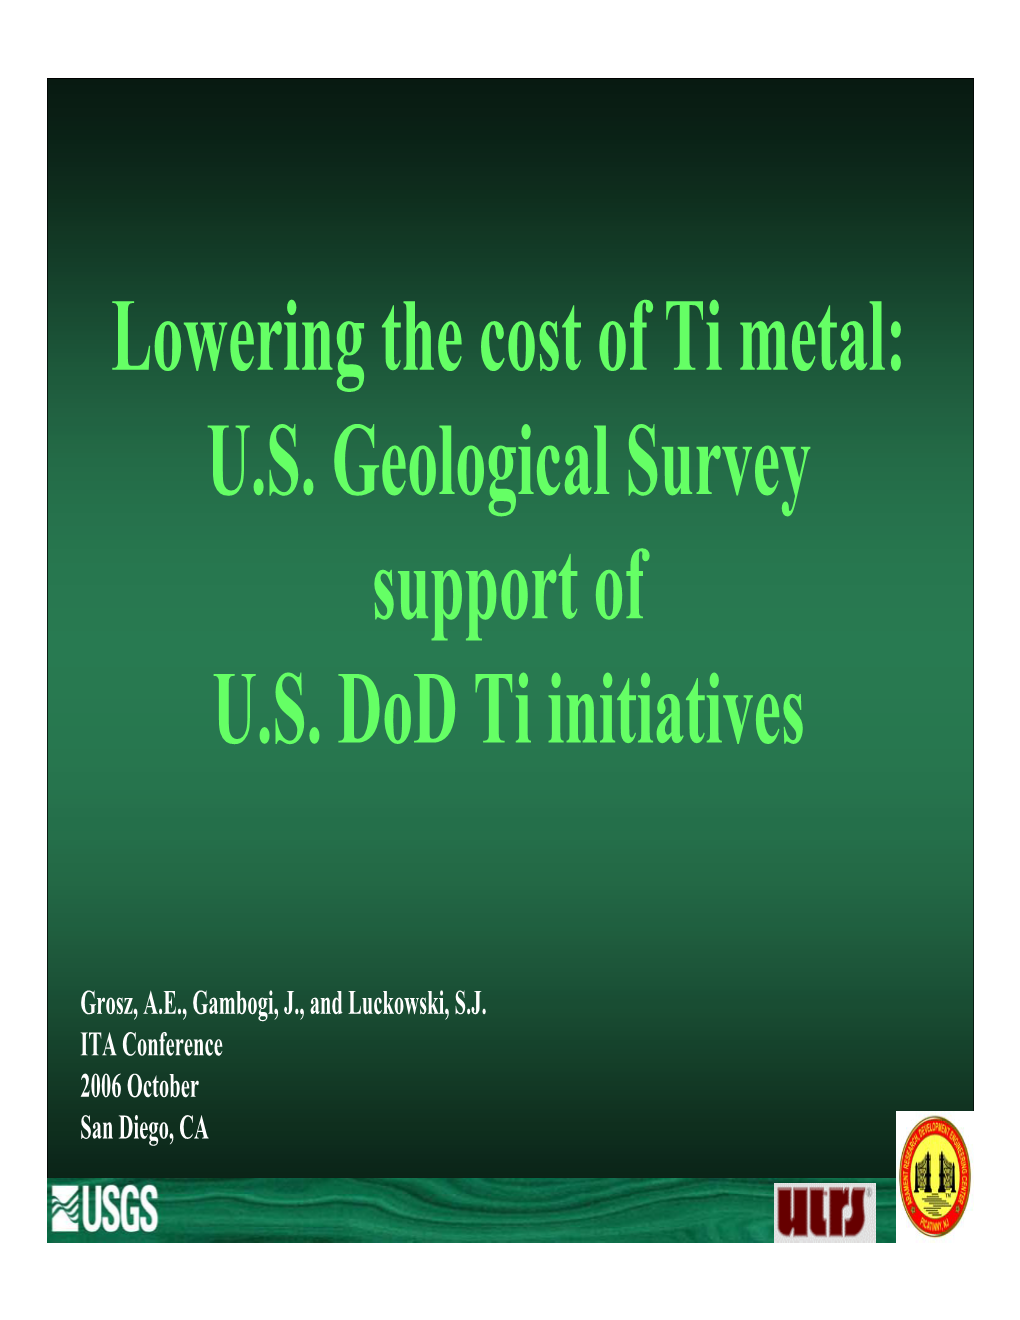 Lowering the Cost of Ti Metal: U.S. Geological Survey Support of U.S. Dod Ti Initiatives